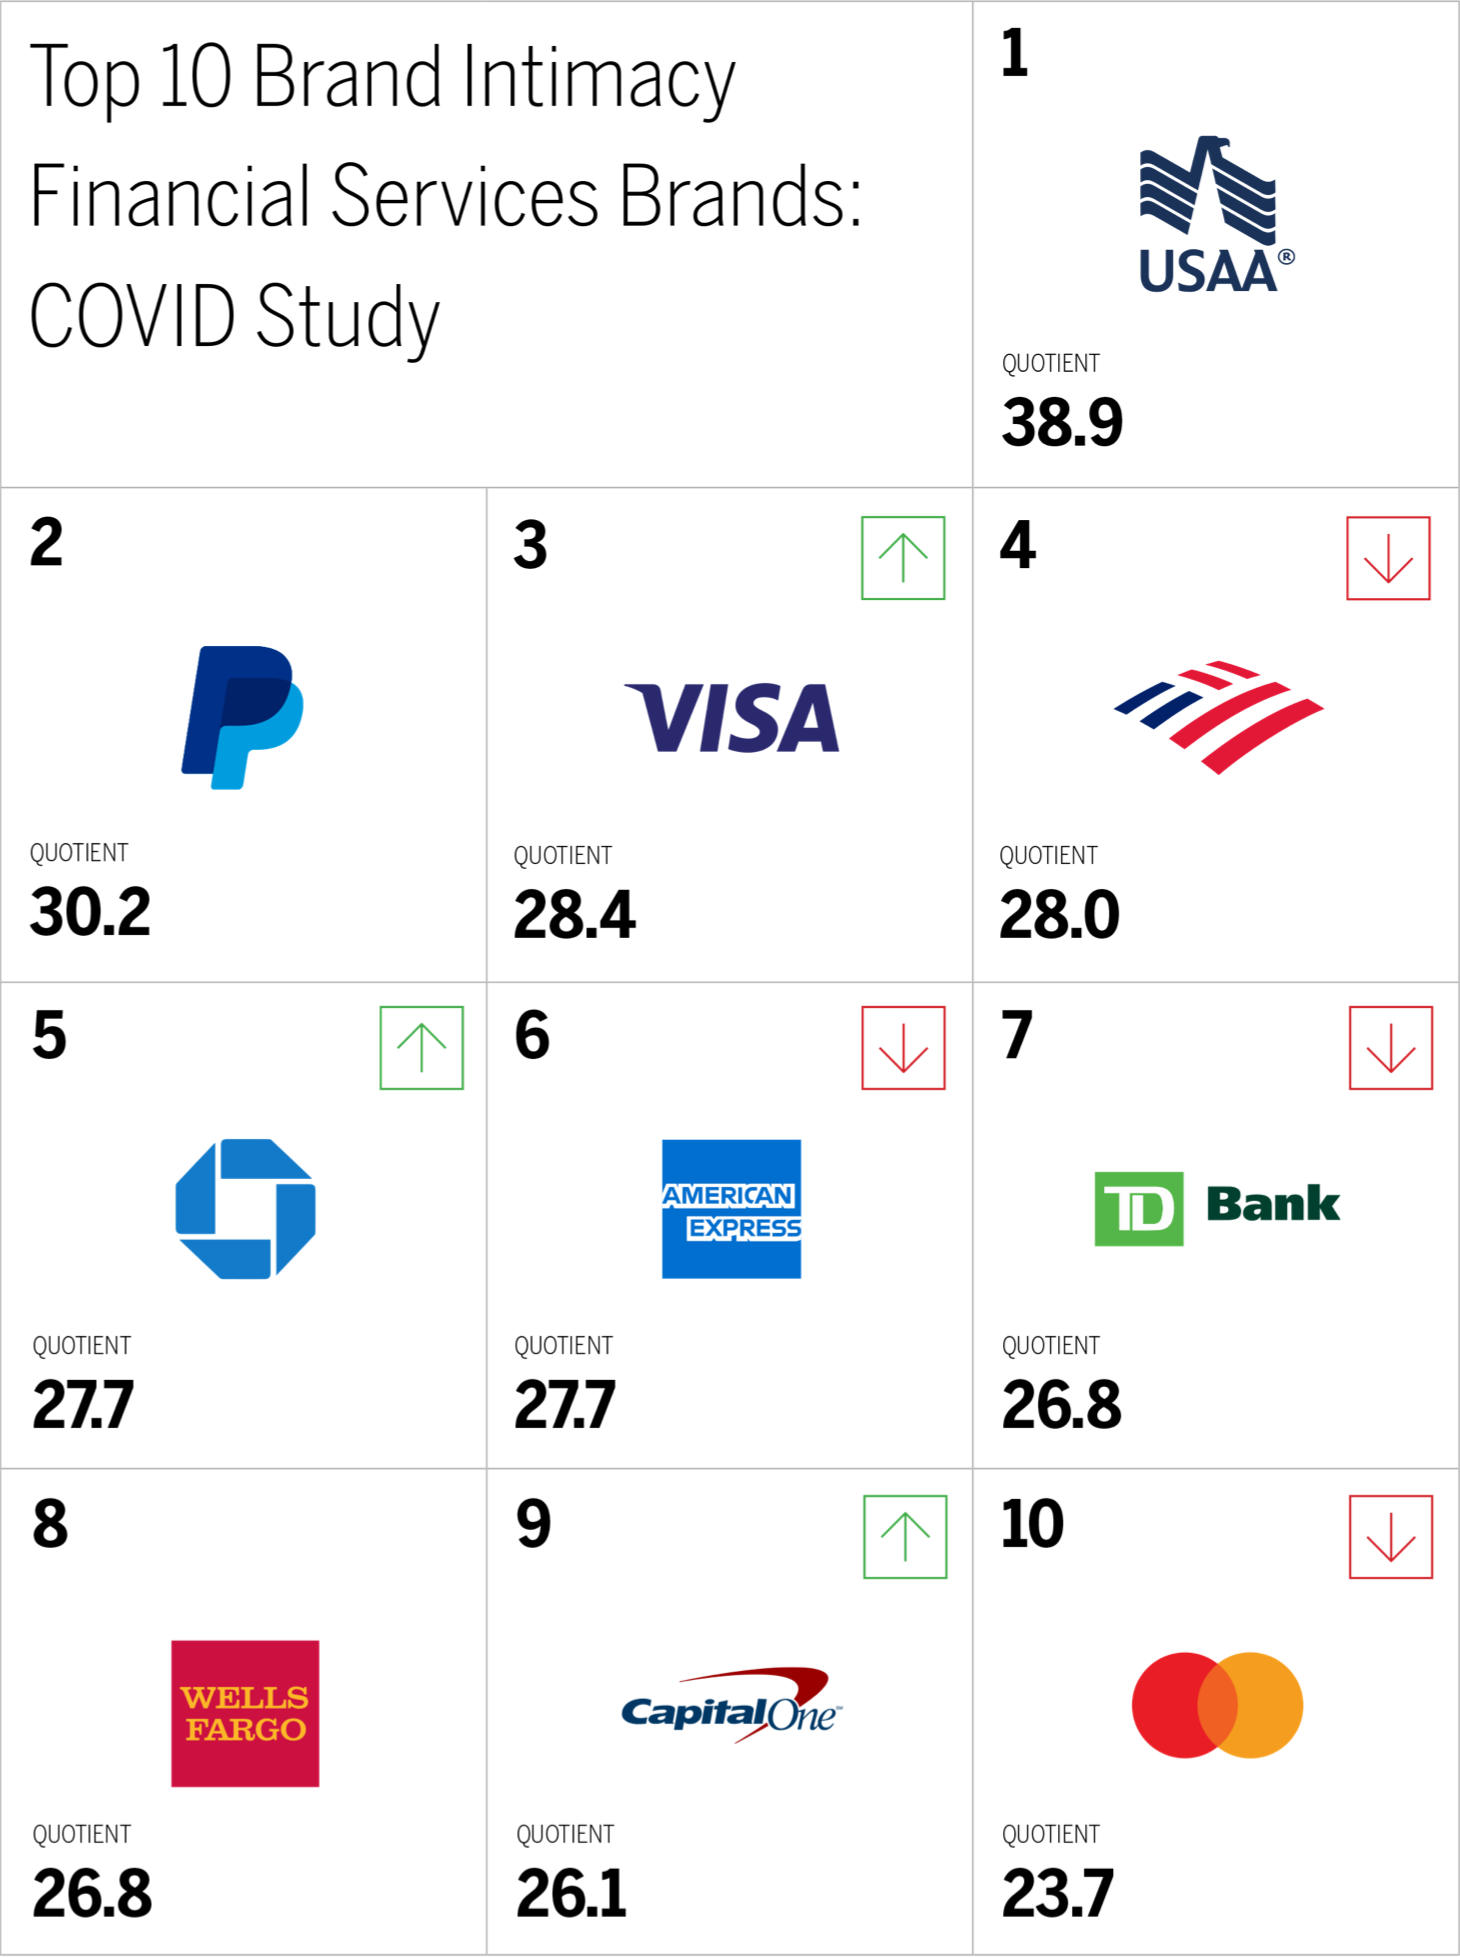 Top 10 Brand Intimacy
Financial Services Brands:
COVID Study Chart